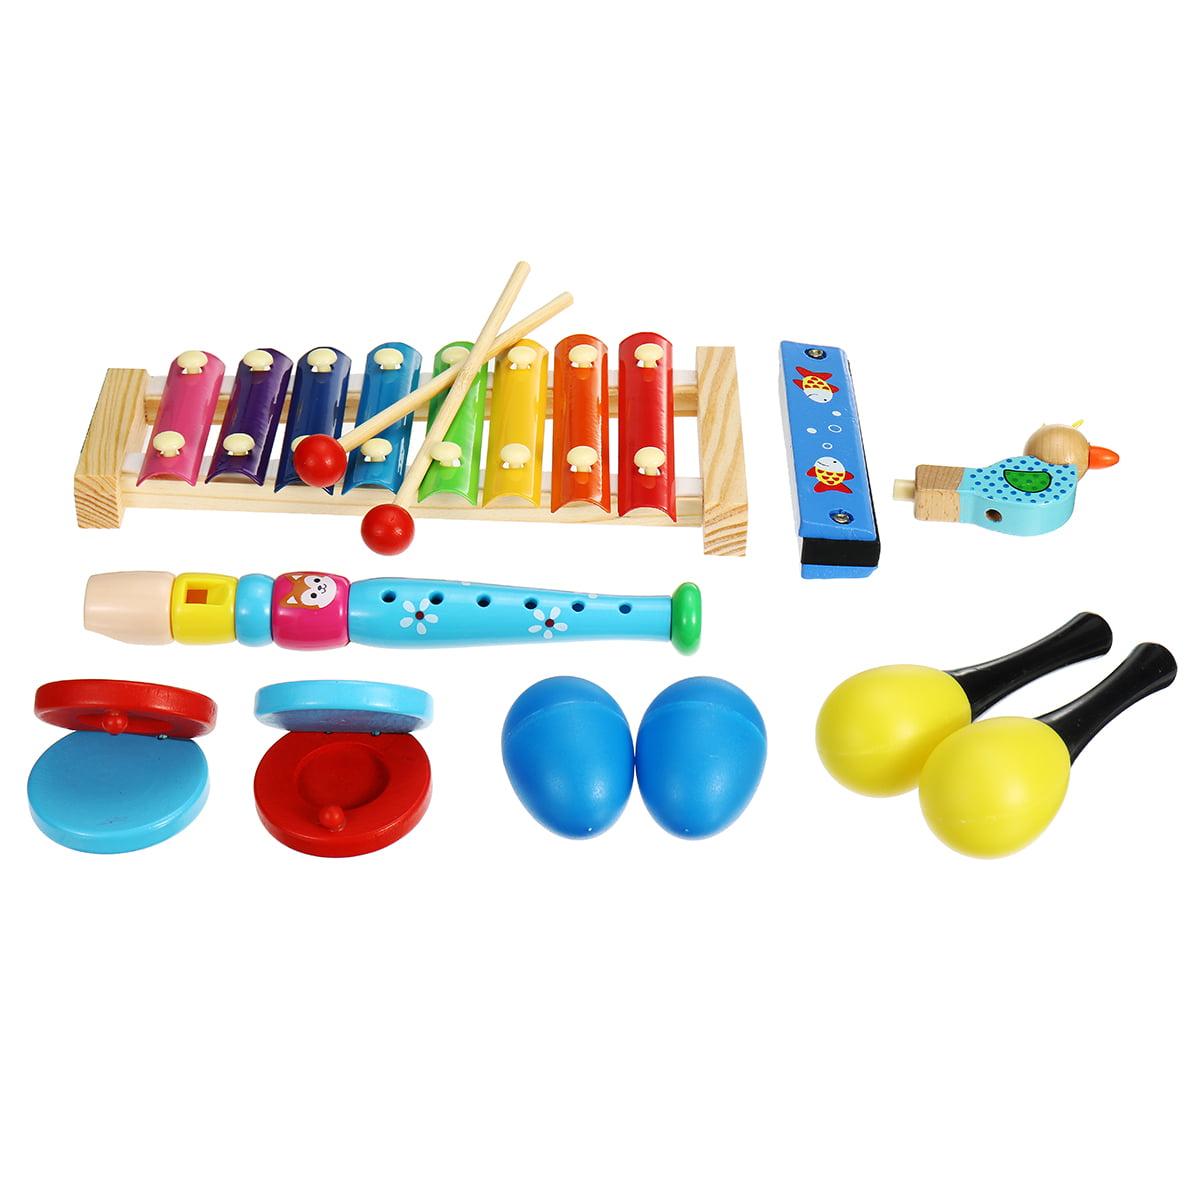 KM_ Wooden Cylinder Orff Musical Percussion Instrument Kids Puzzle Toy Gift No 